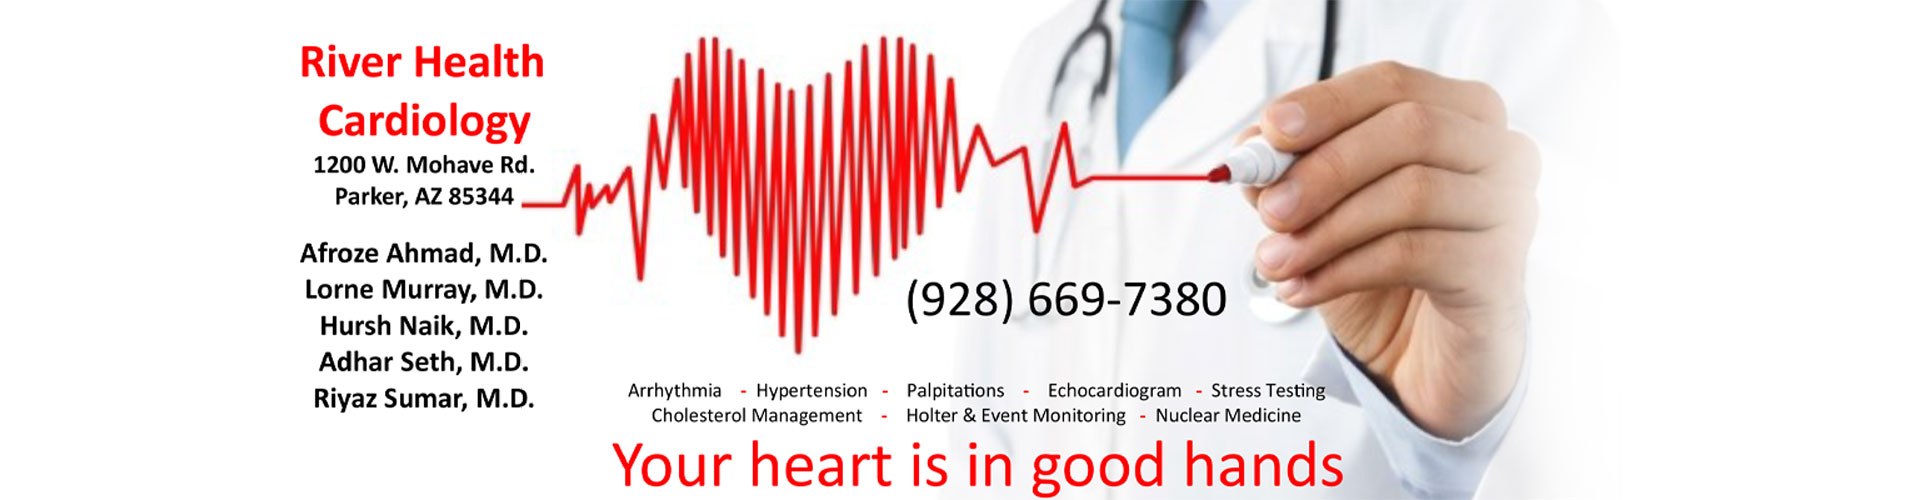 Banner picture of a male Physician drawing a heart rate beat with a marker. Banner says:

River Health Cardiology 
1200 W. Mohave Rd.
Parker, AZ 85344

Afroze Ahmad, M.D.
Lorne Murray, M.D.
Hursh Naik, M.D.
Adhar Seth, M.D.
Riyaz Sumar, M.D.


Arrhythmia -Hypertension -Palpitations -Echocardiogram -Stress Testing Cholesterol Management -Holter & Event Monitoring -Nuclear Medicine 


(928) 669-7380
Your heart is in good hands